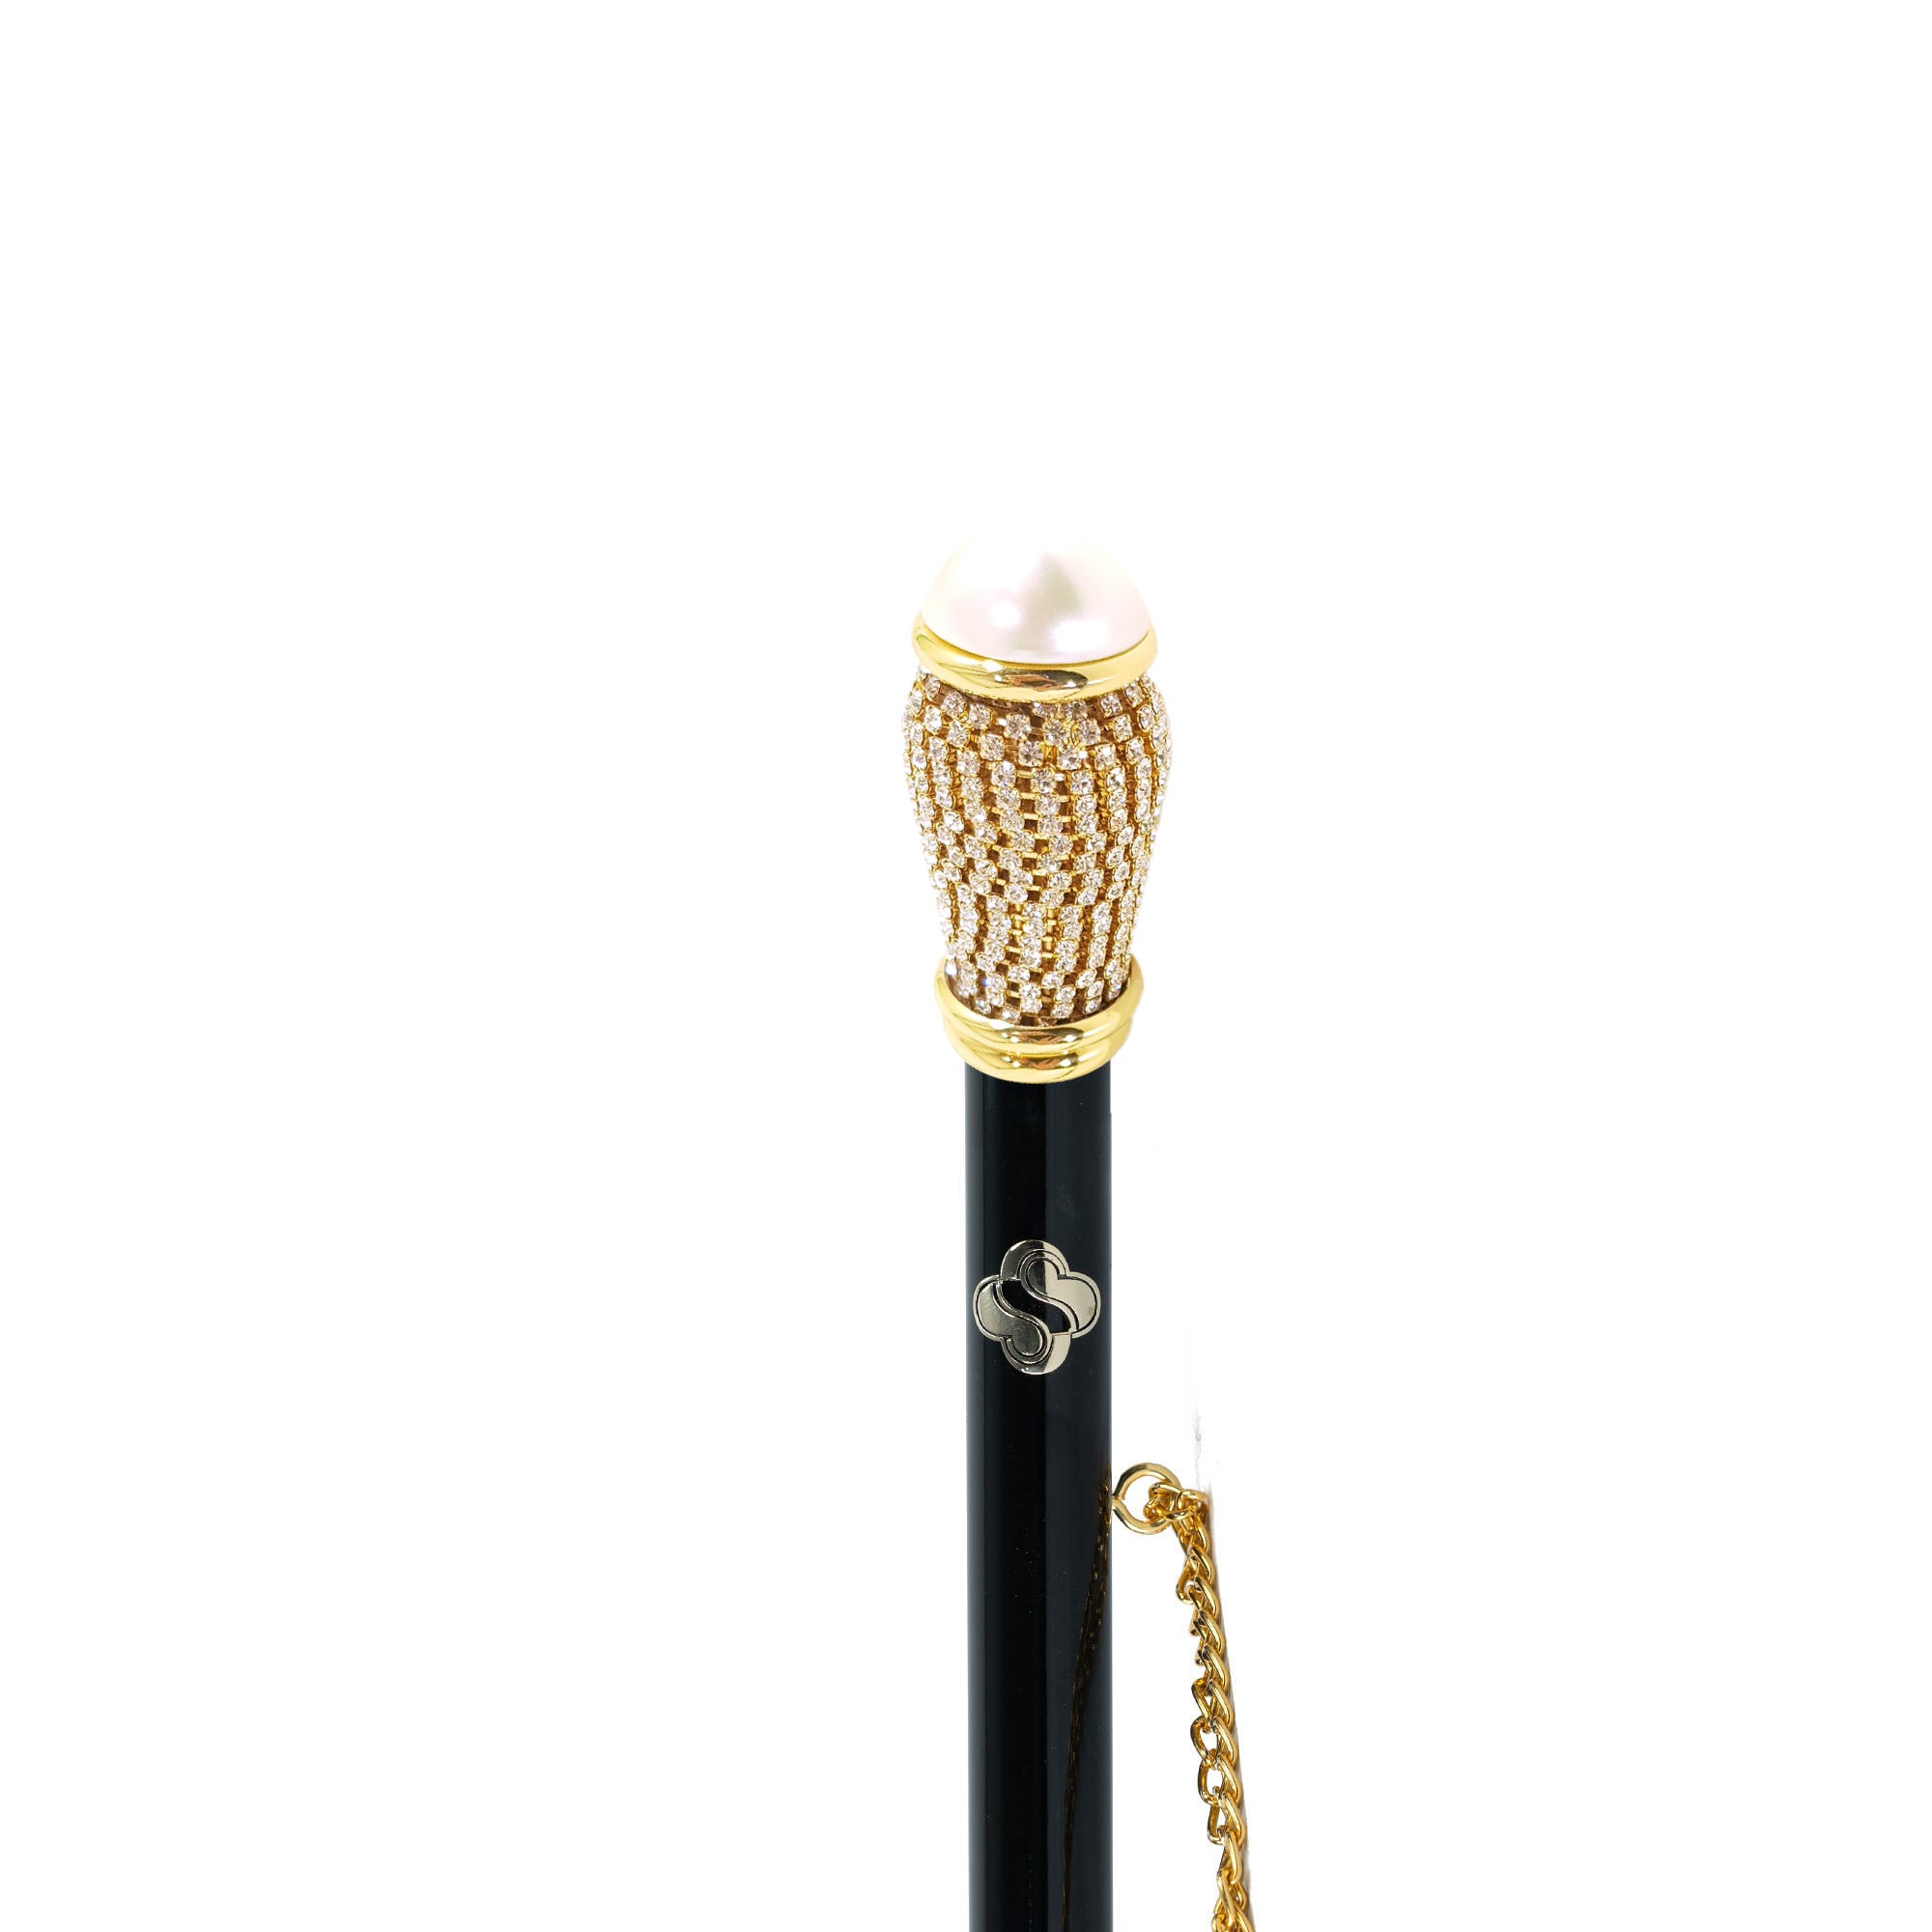 Golden Treasure: 24K Gold-Plated Shoehorn with Crystal